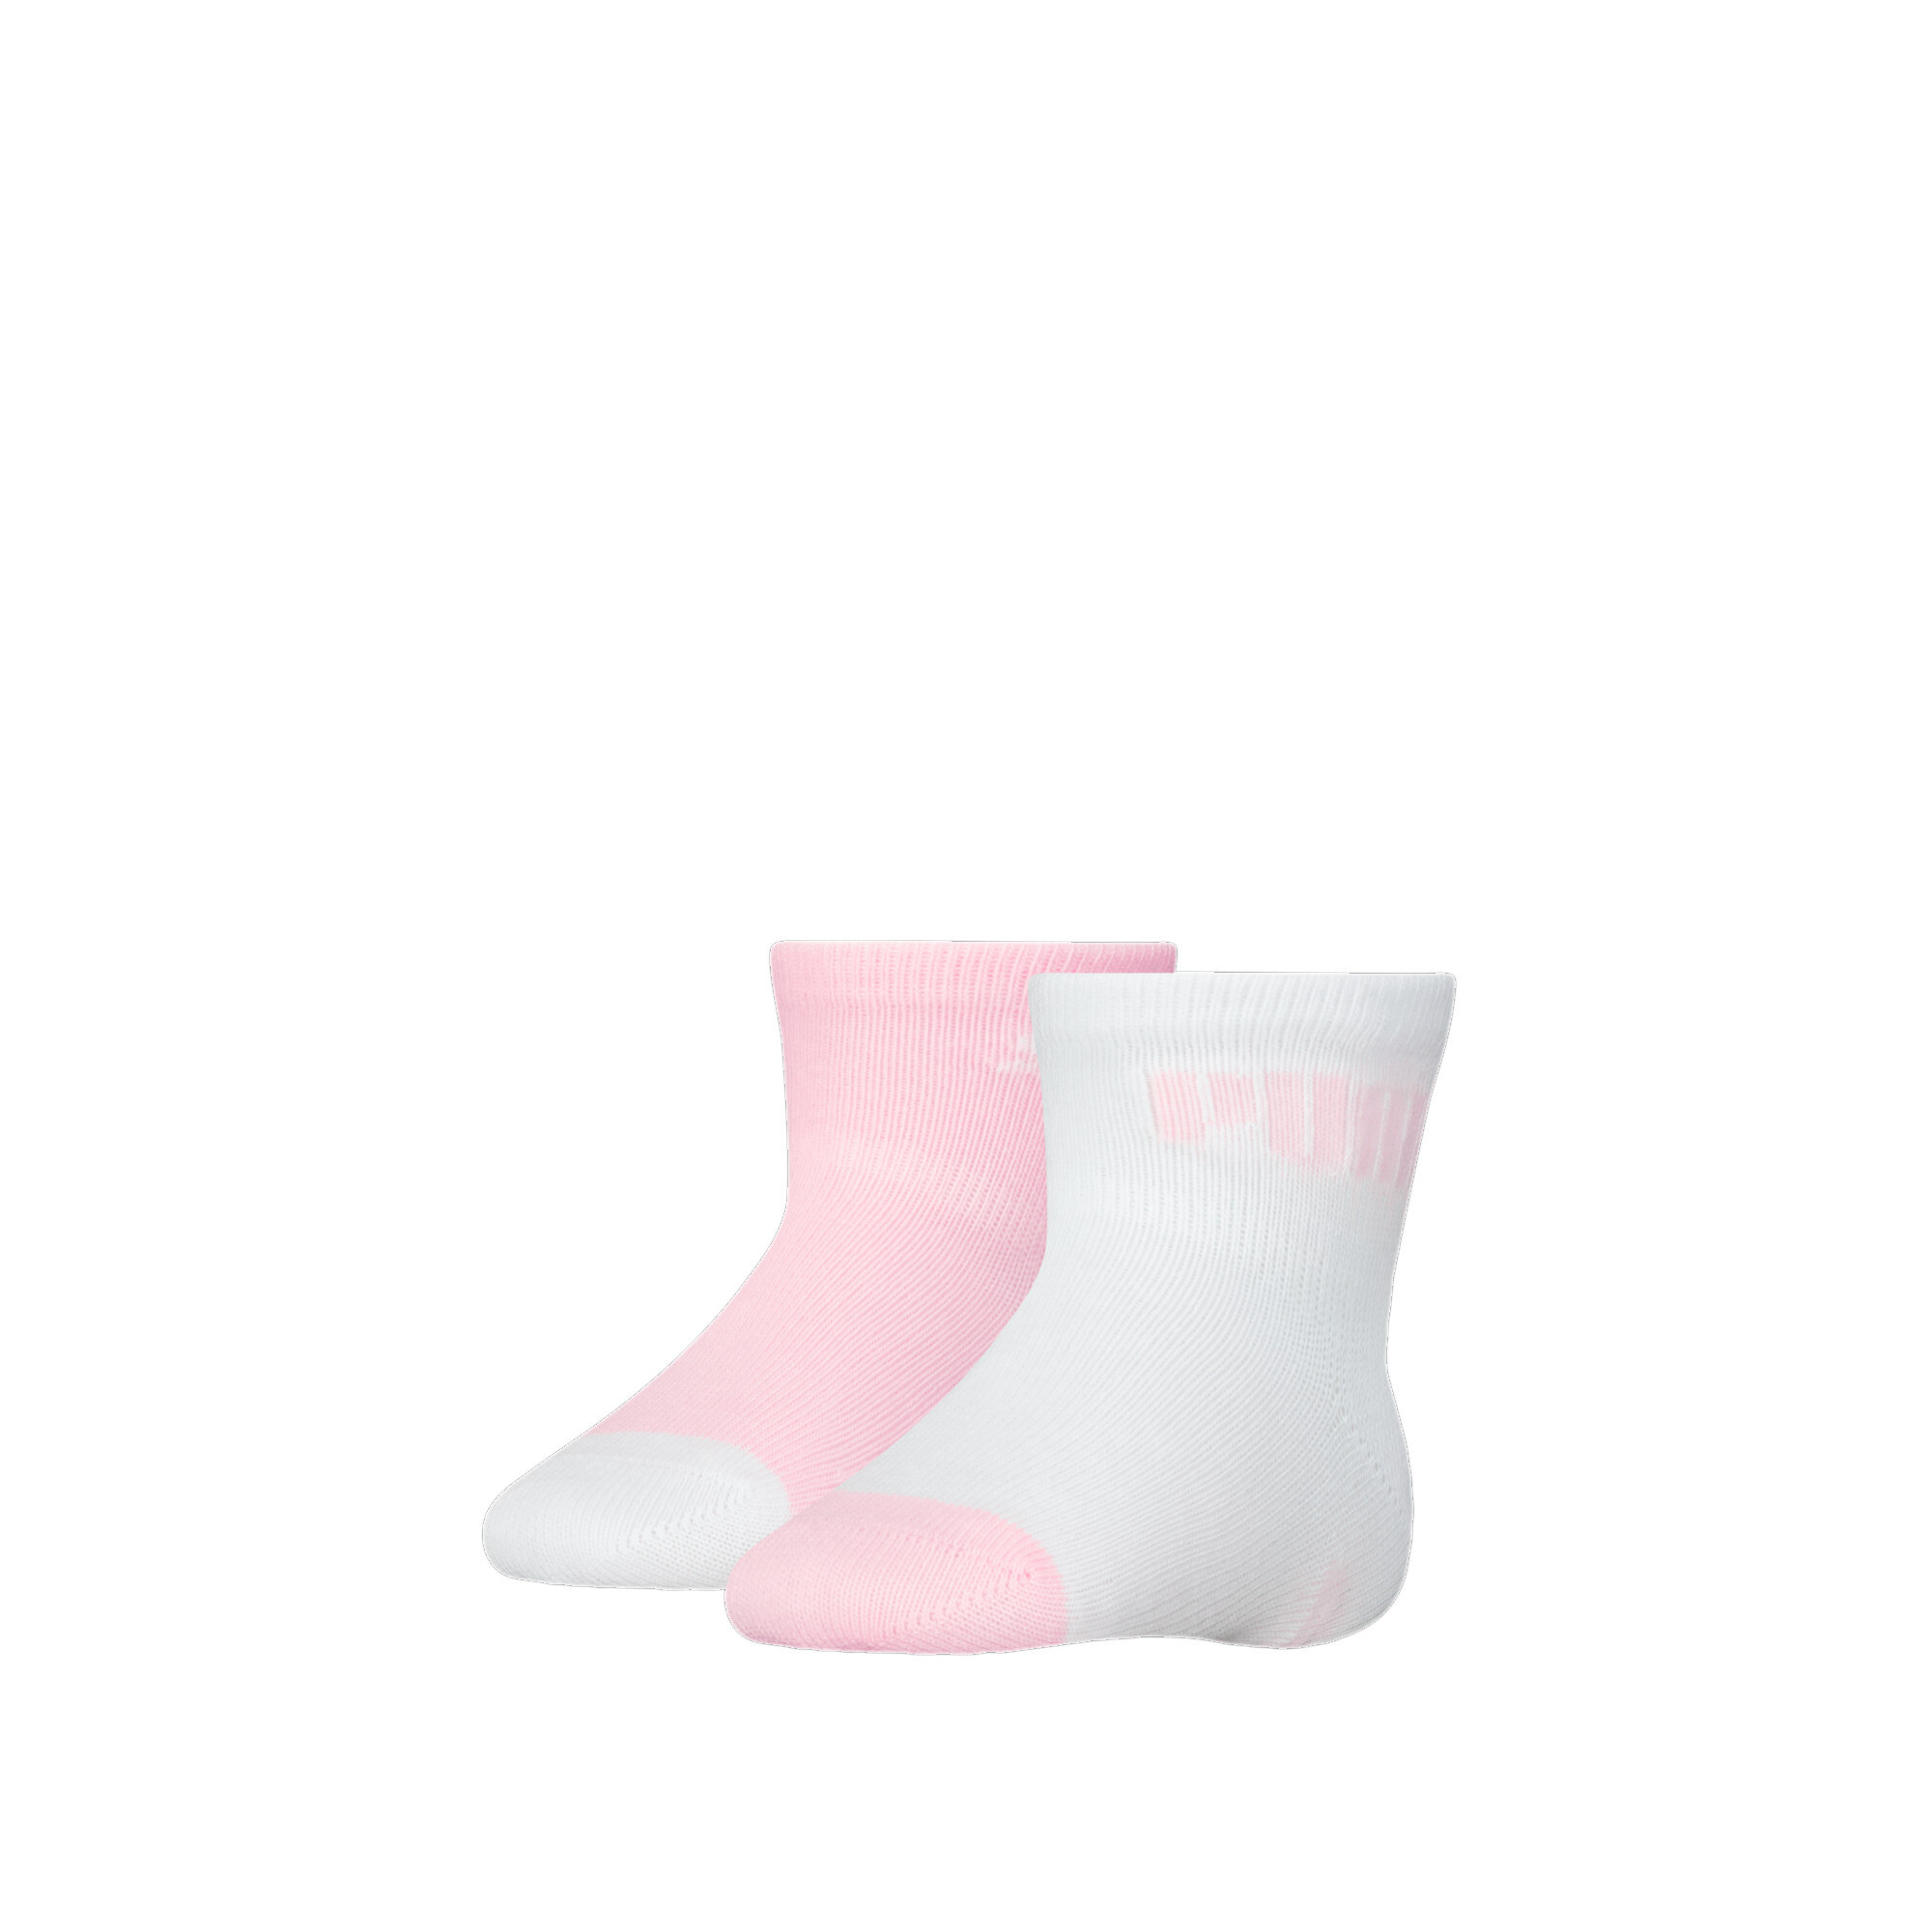 Puma Baby Classic Socks 2 Pack, Pink, Size 15-18, Age